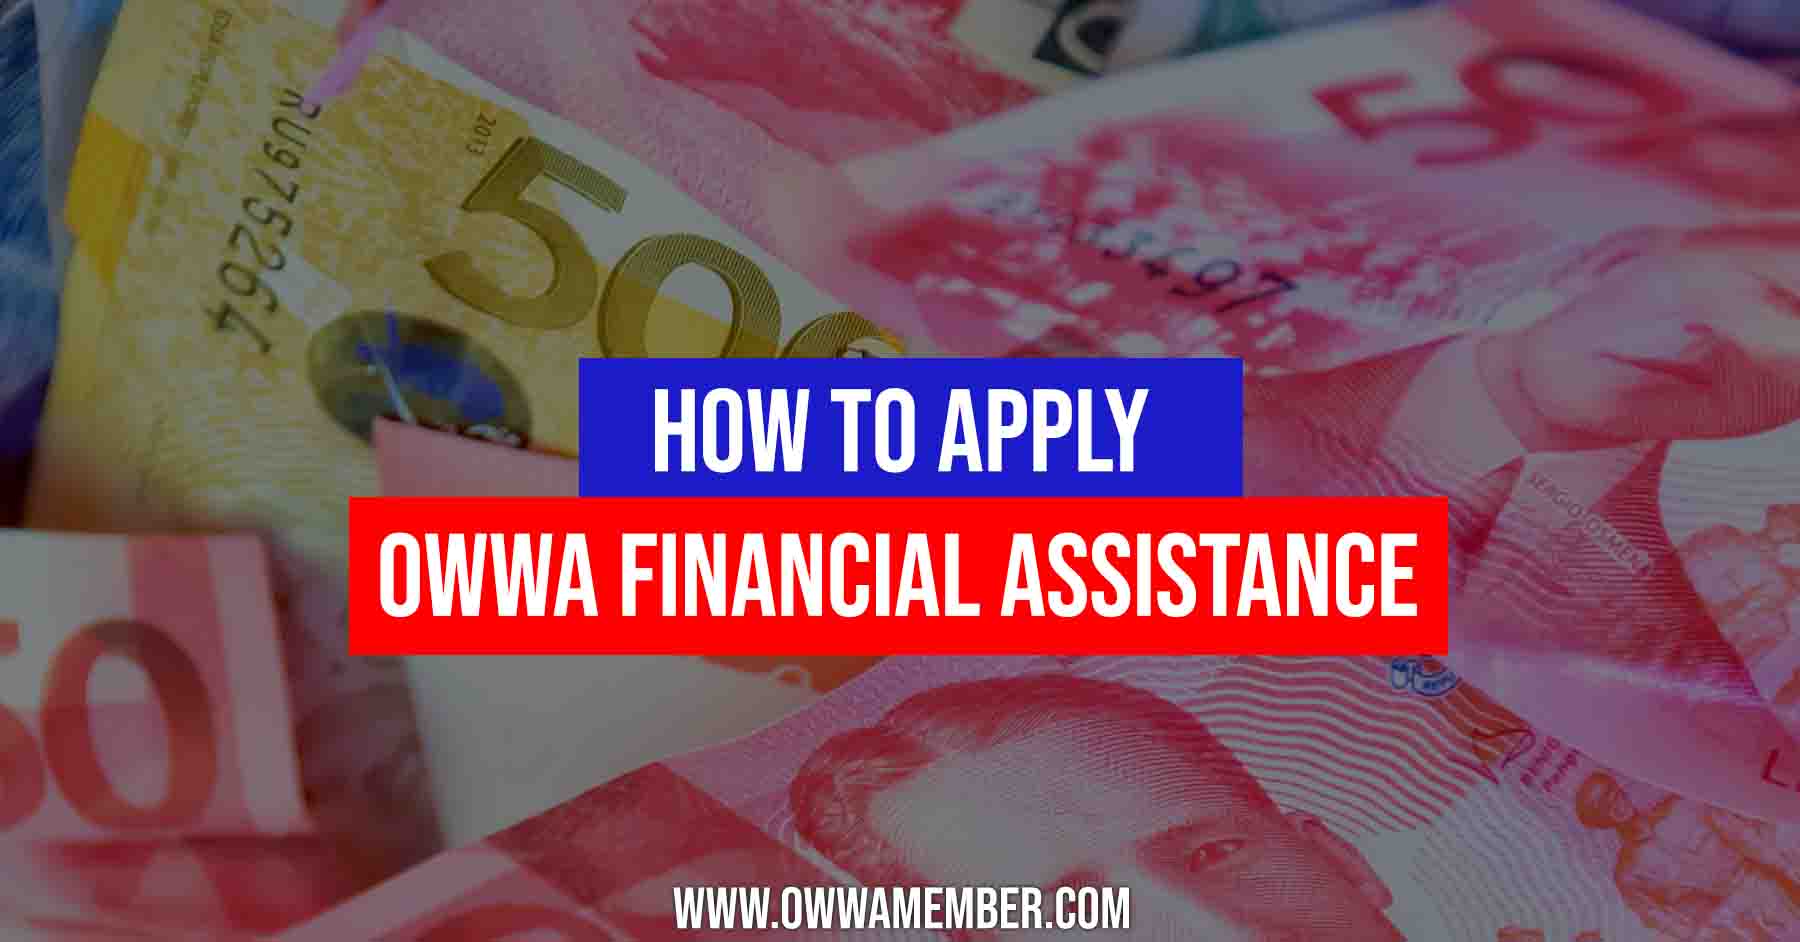 owwa financial assistance for ofw